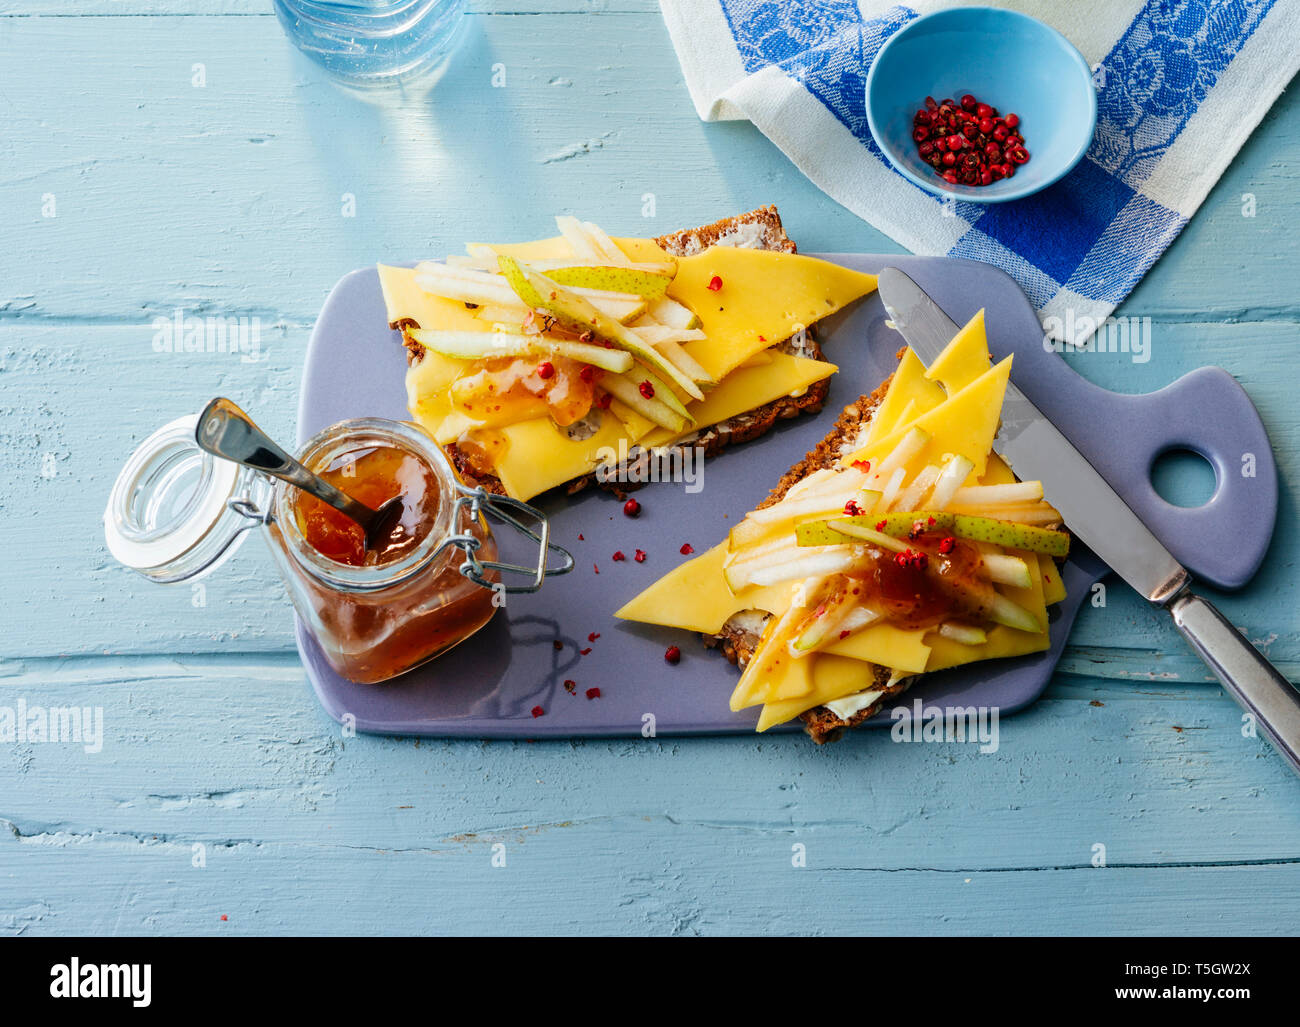 Sandwiches with sliced cheese, pear and chutney Stock Photo